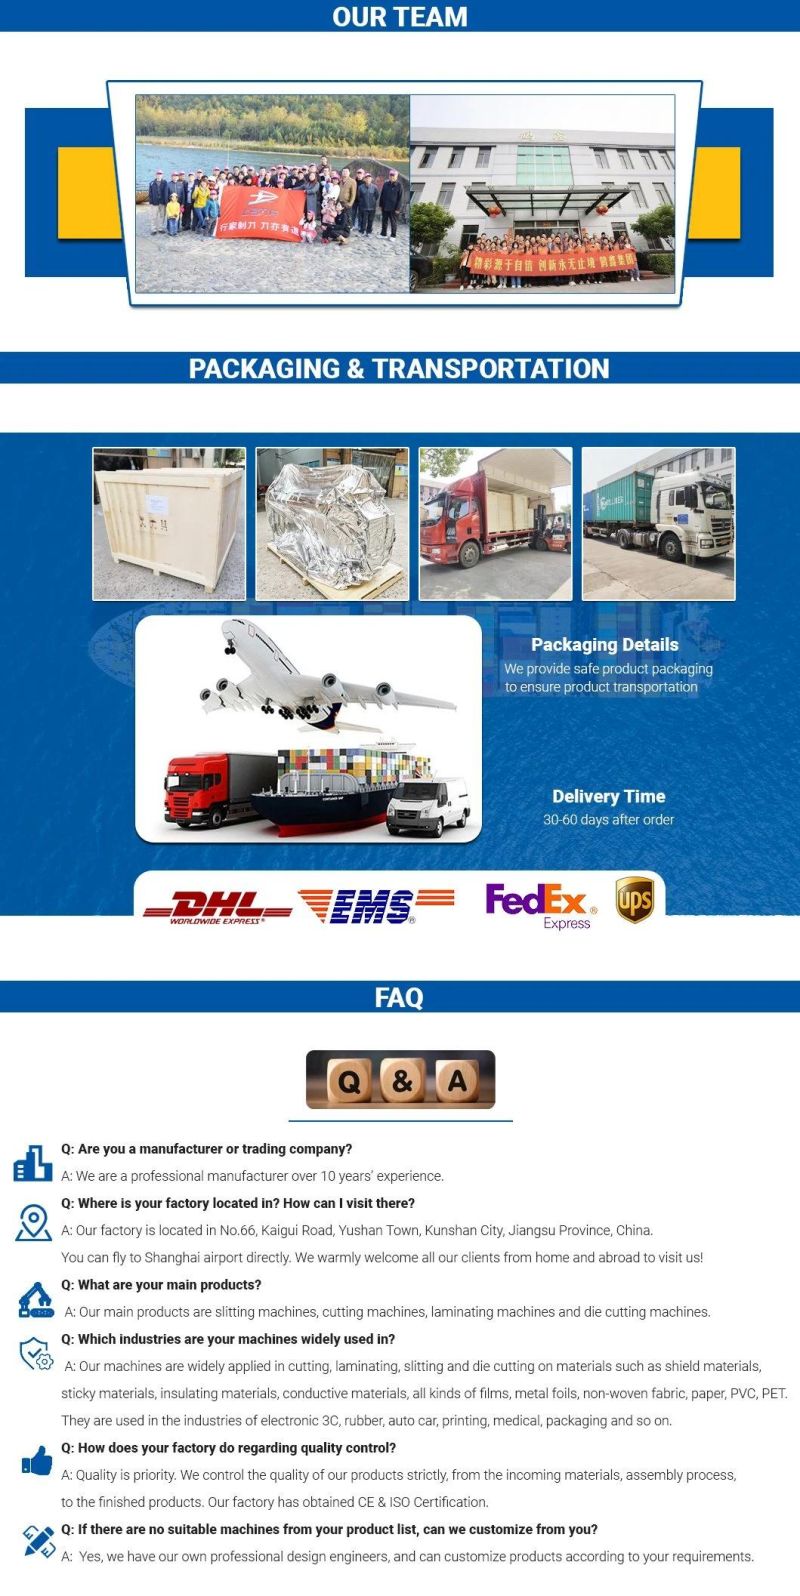 Electronic Material Plastic Tube Cutting Machine, Hot Sale!